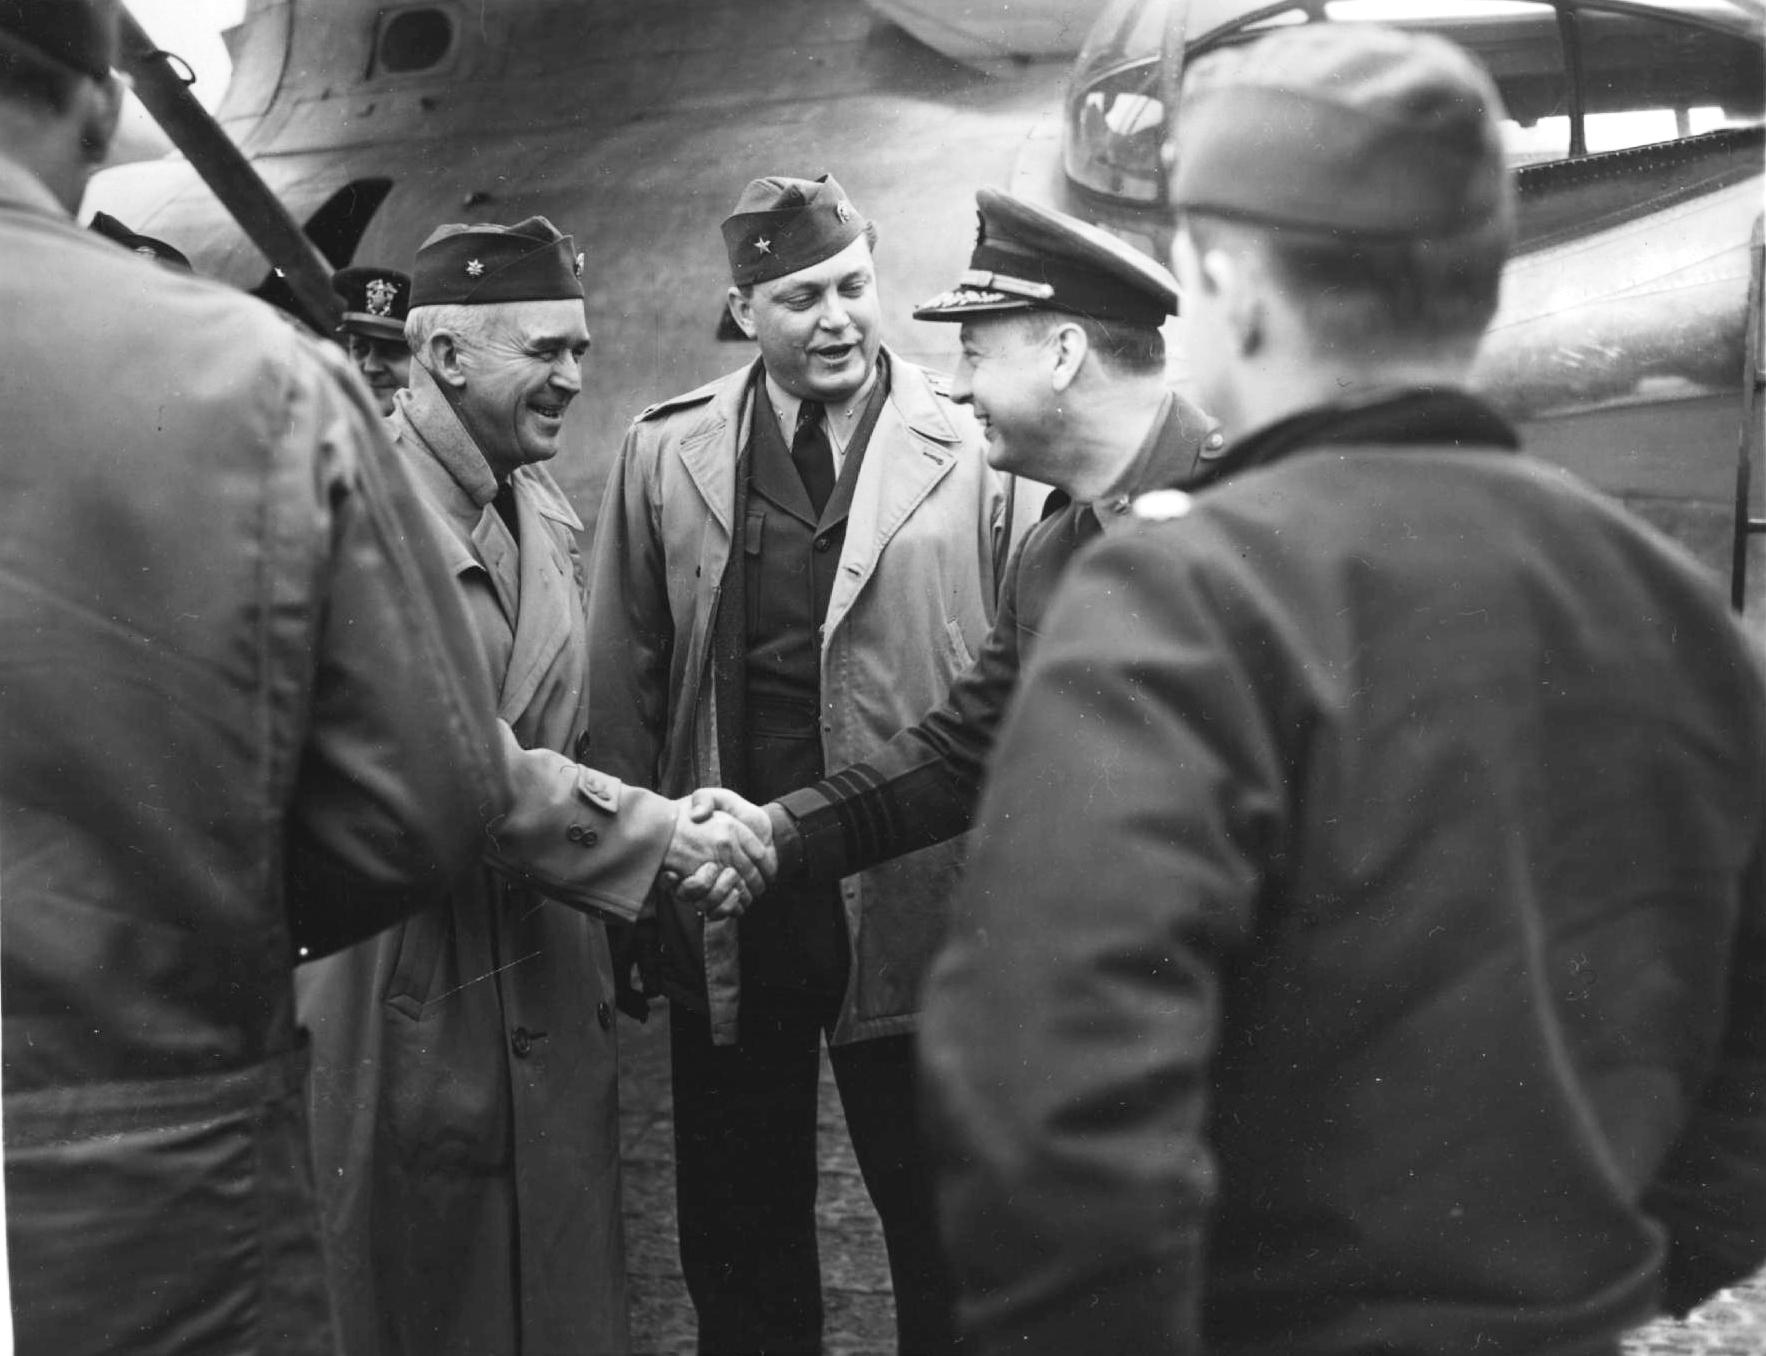 US Navy Commodore Leslie Gehres, commander of Fleet Air Wing 4 in the Aleutians (with his back to the PBY Catalina airplane), making introductions of newly arriving officers at Attu, Alaska, 1944.